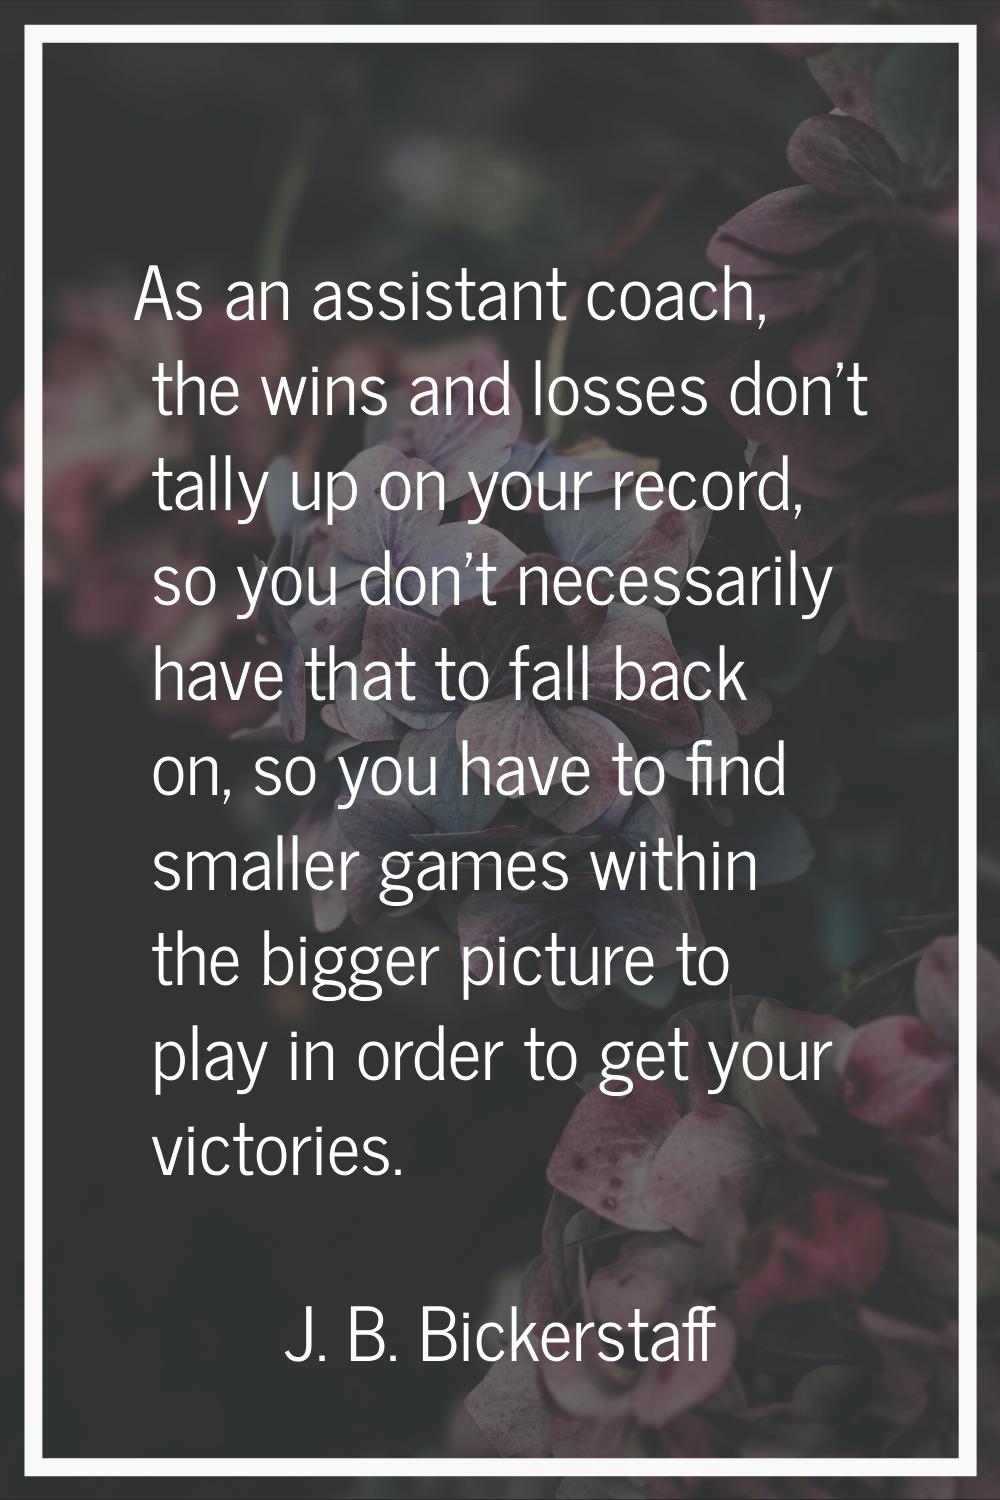 As an assistant coach, the wins and losses don't tally up on your record, so you don't necessarily 